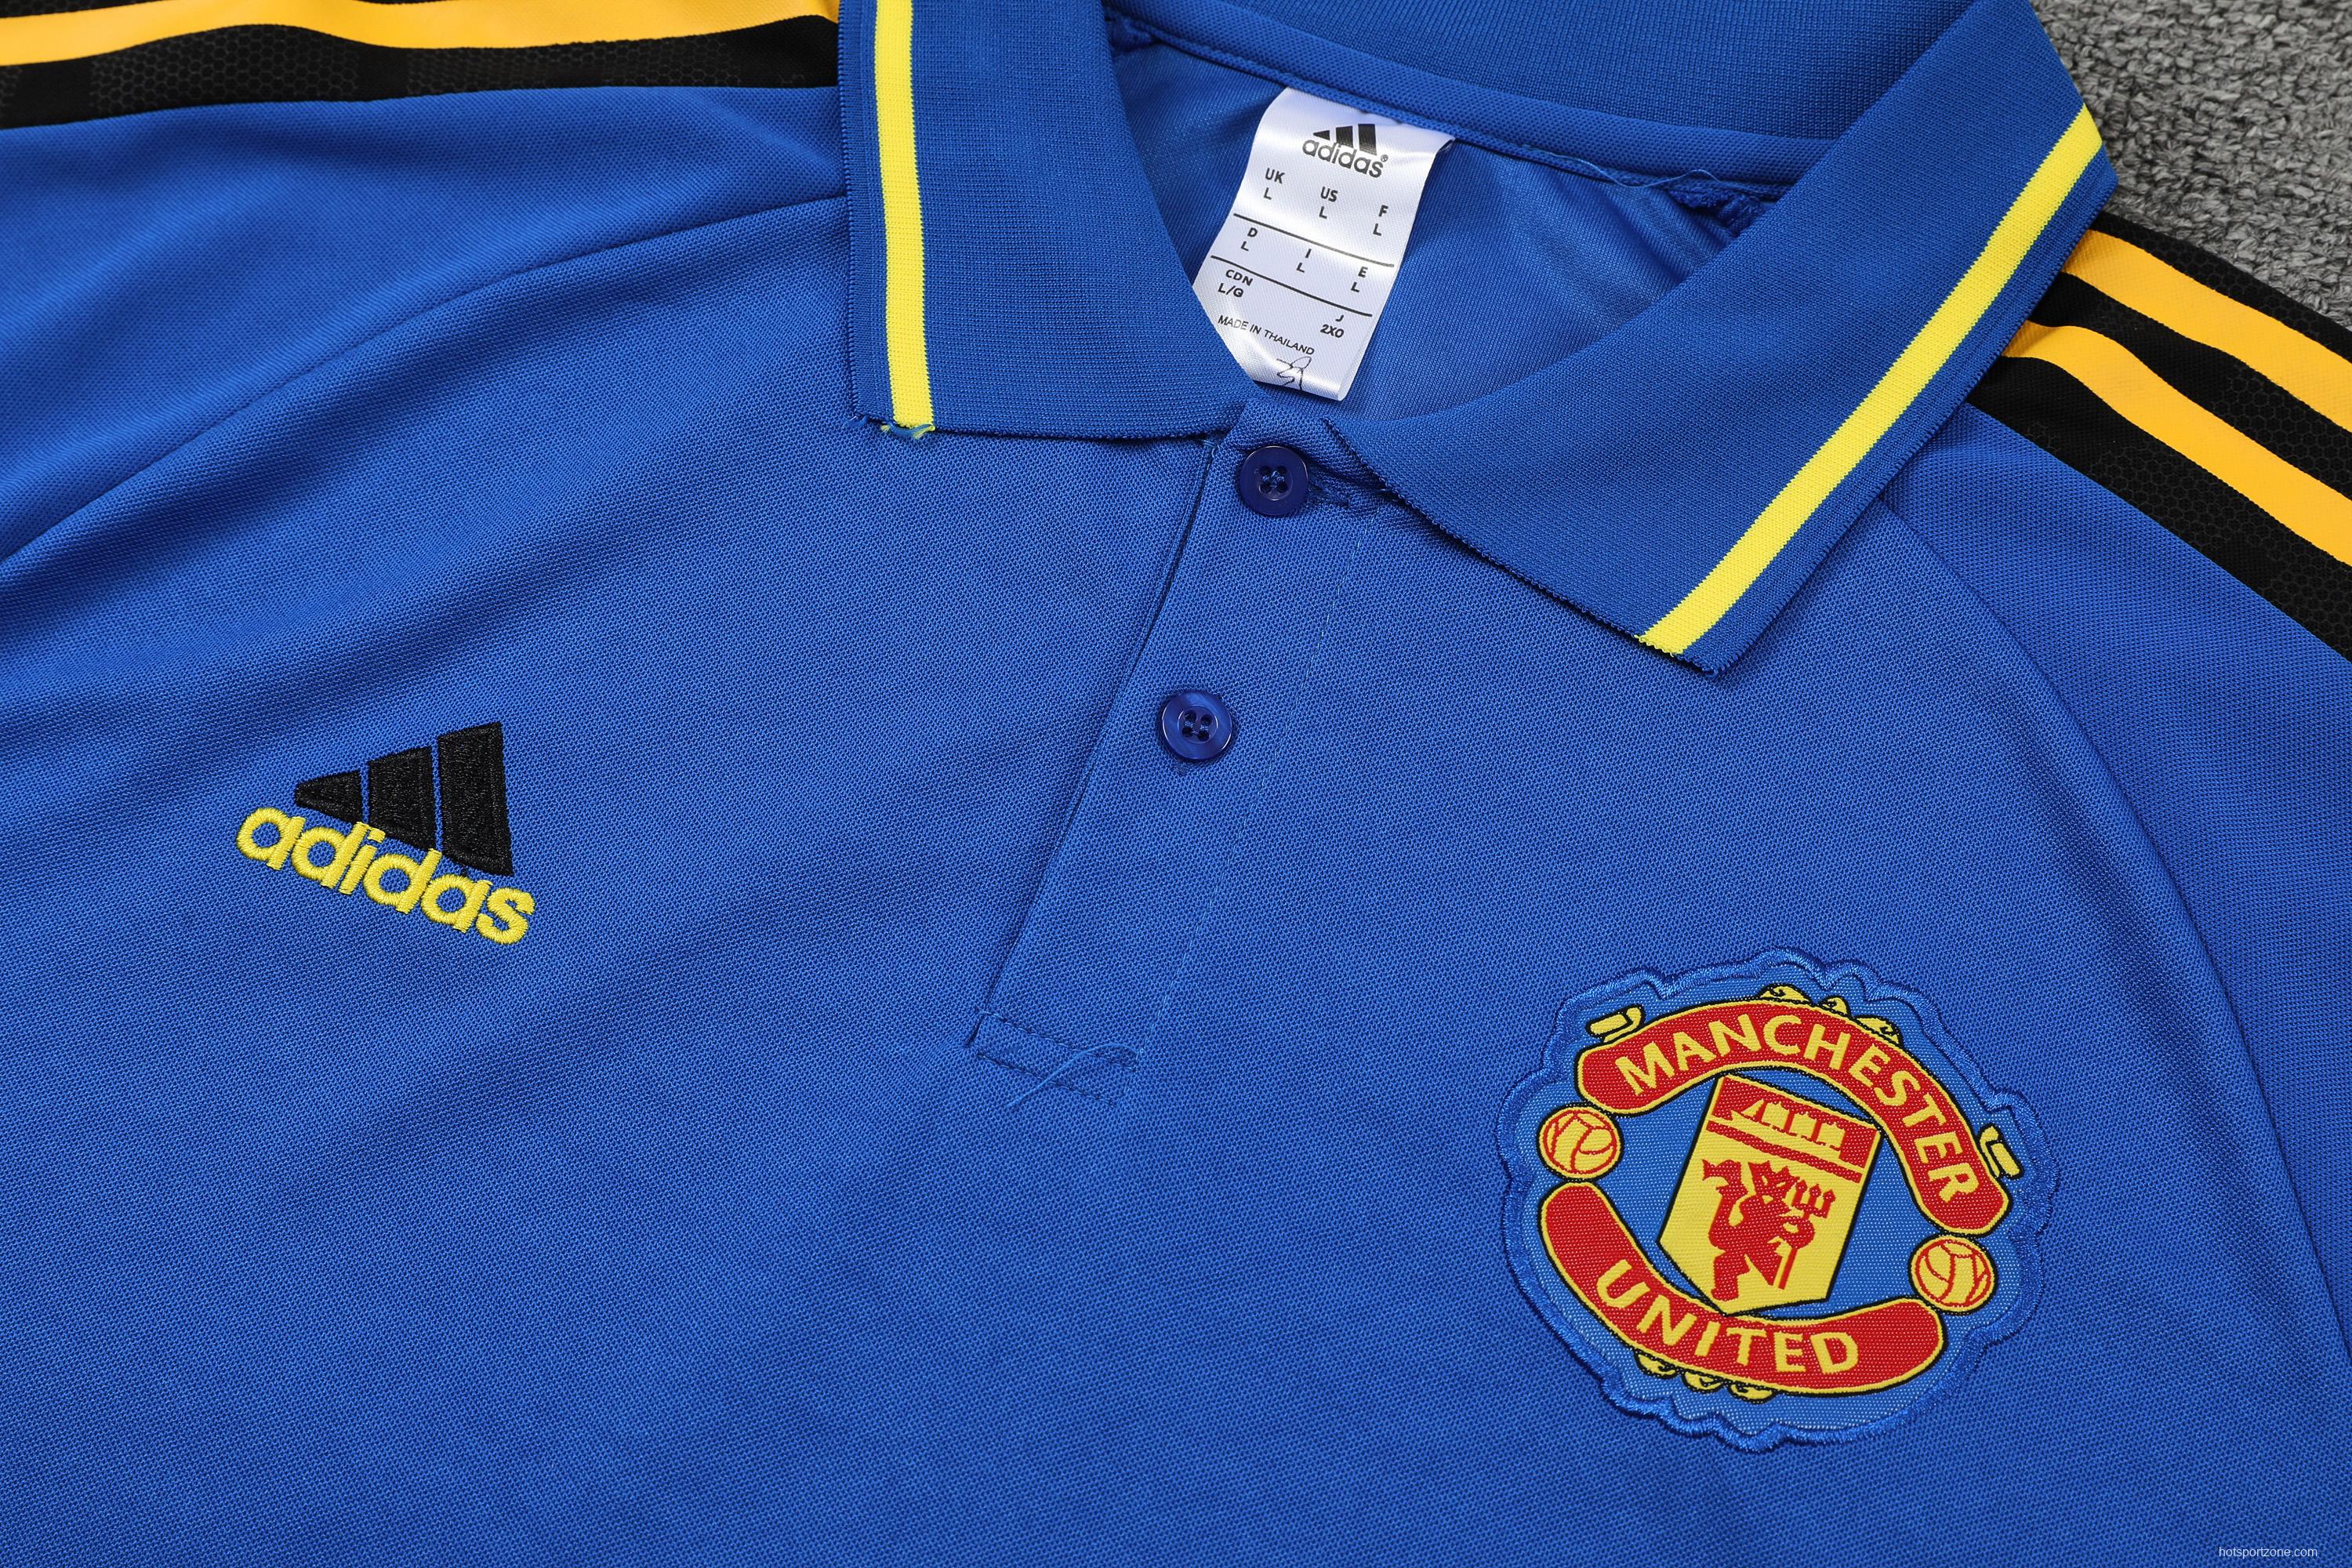 Manchester United POLO kit dark blue (not supported to be sold separately)